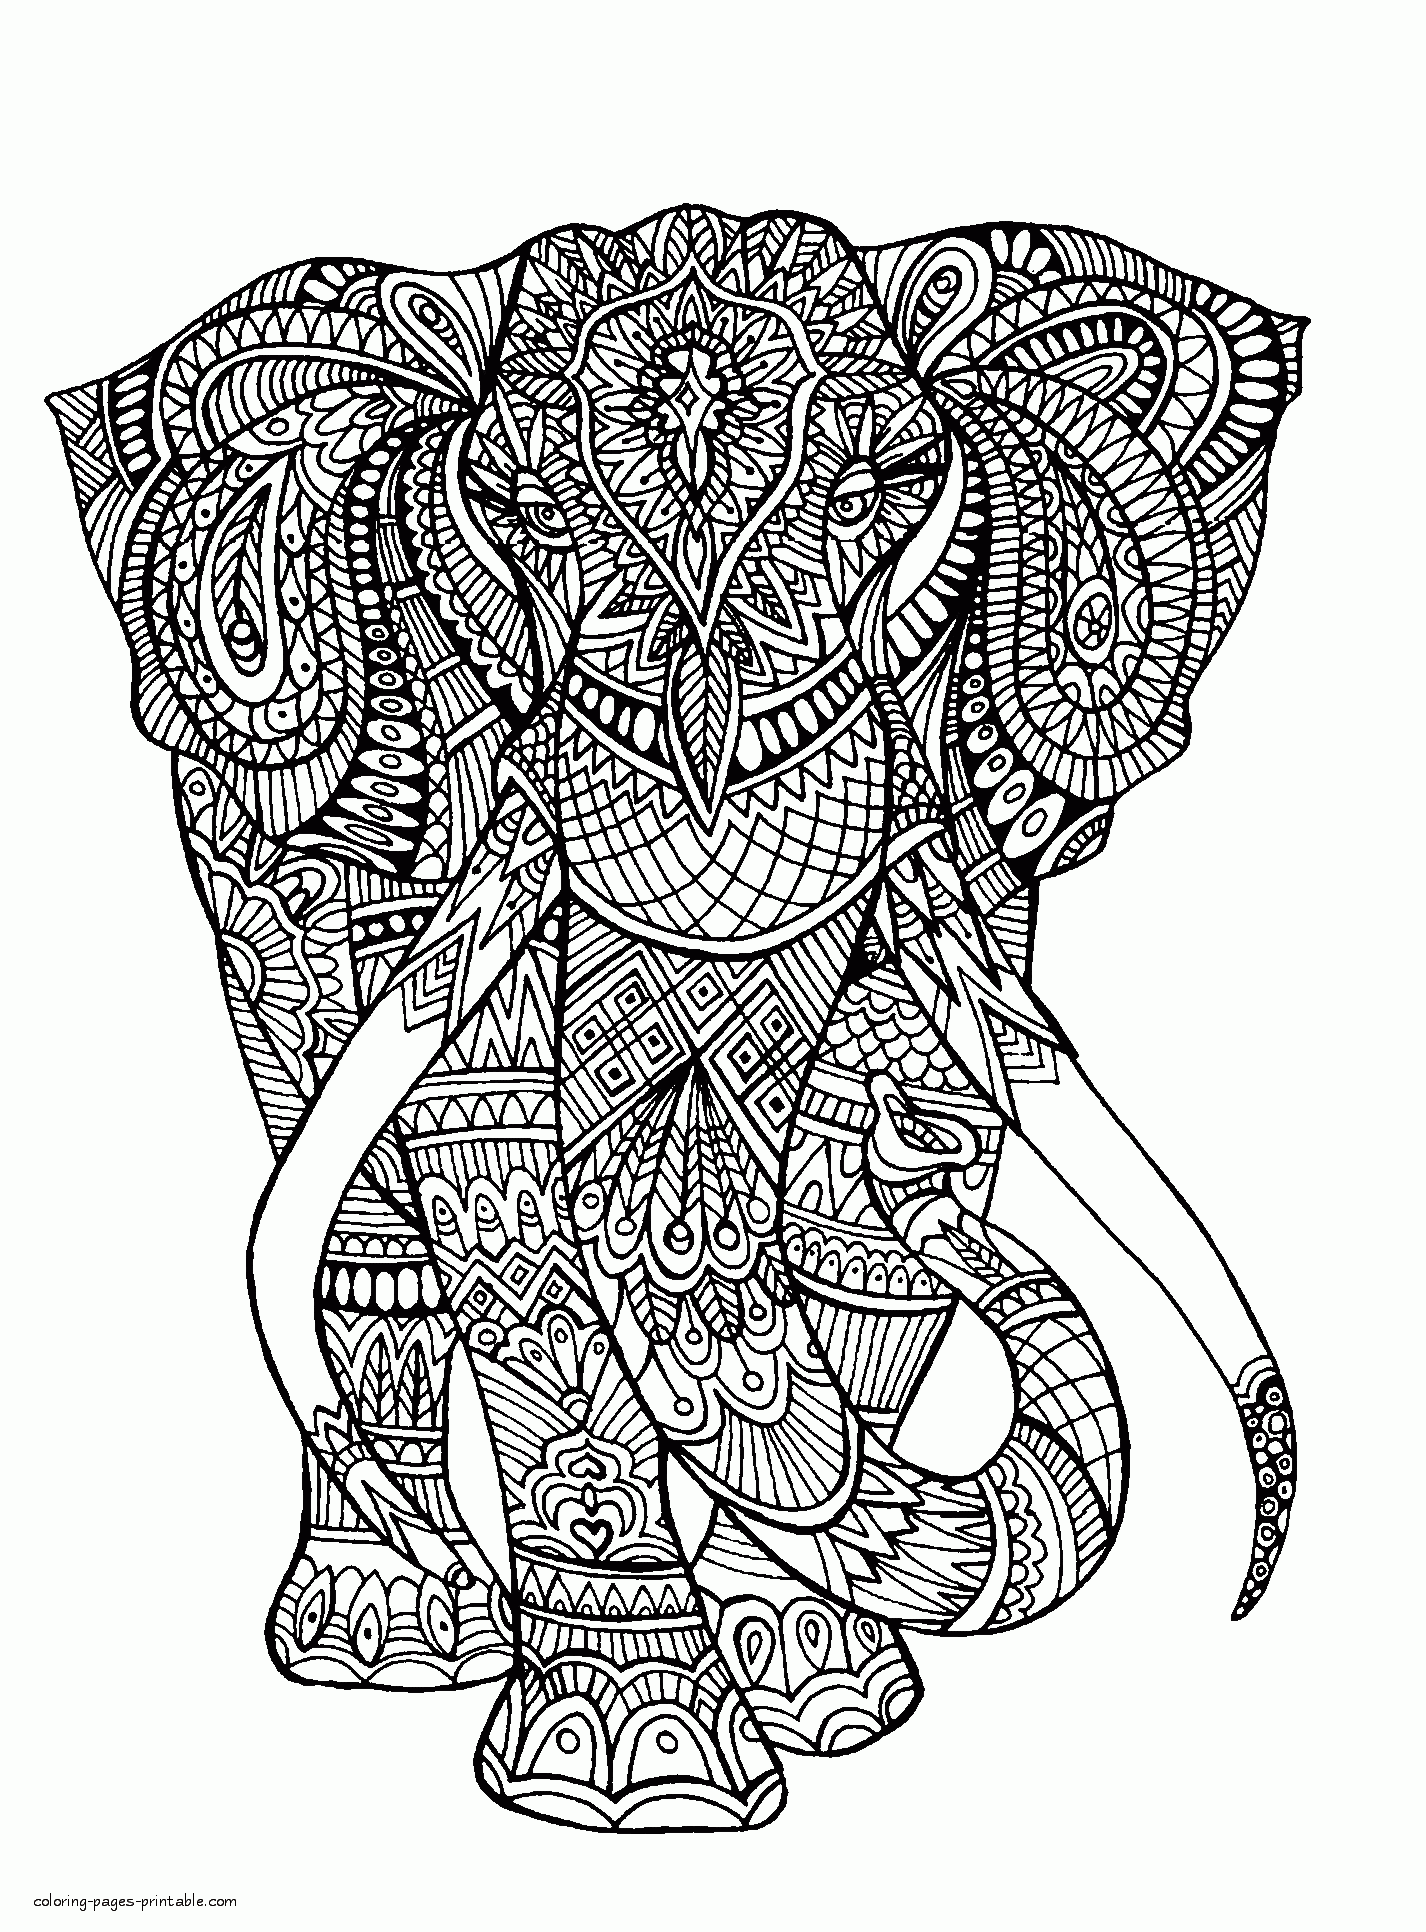 Difficult Elephant Colouring Page    COLORING PAGES PRINTABLE.COM